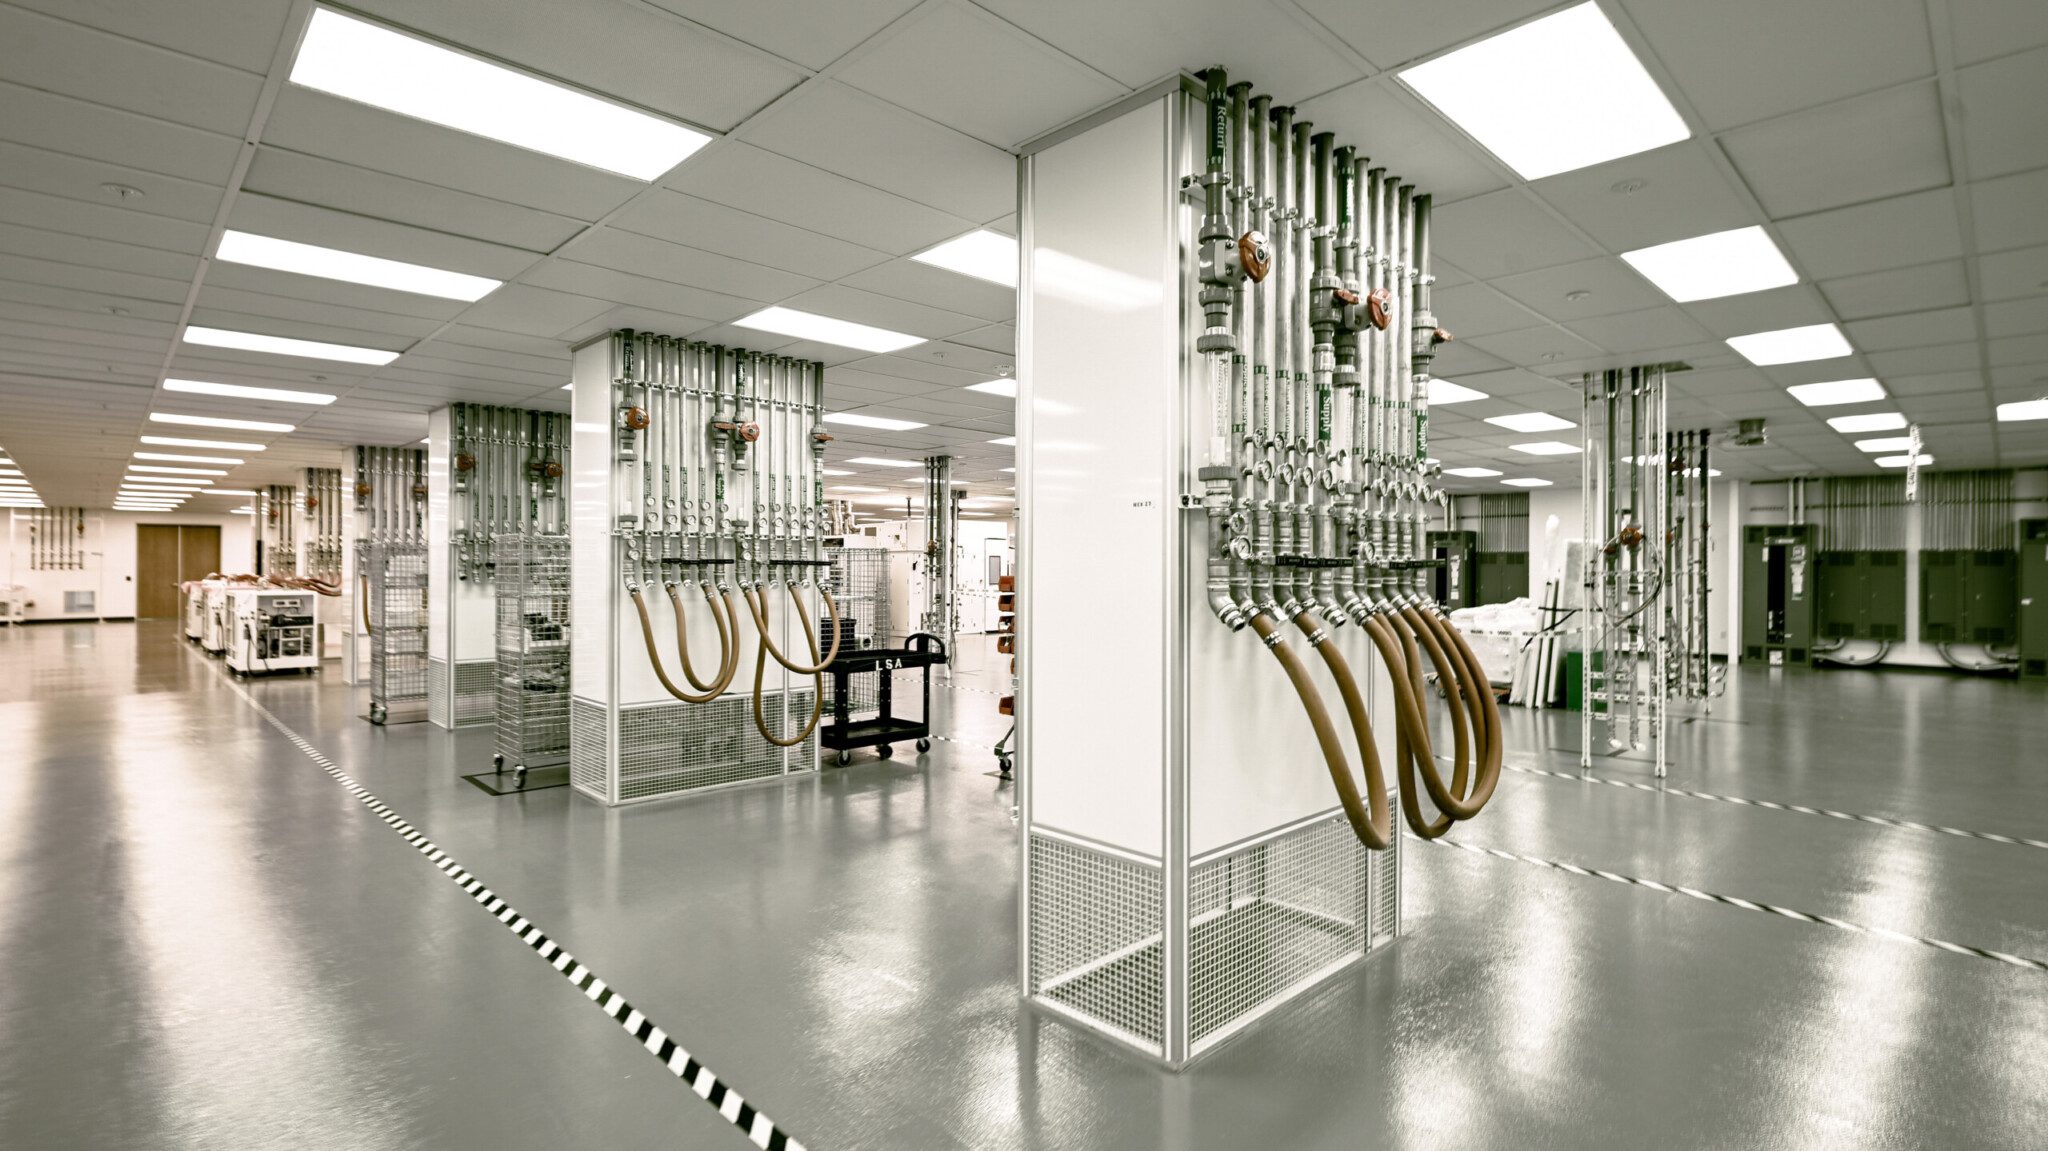 Cleanroom containing high tech laboratory equipment